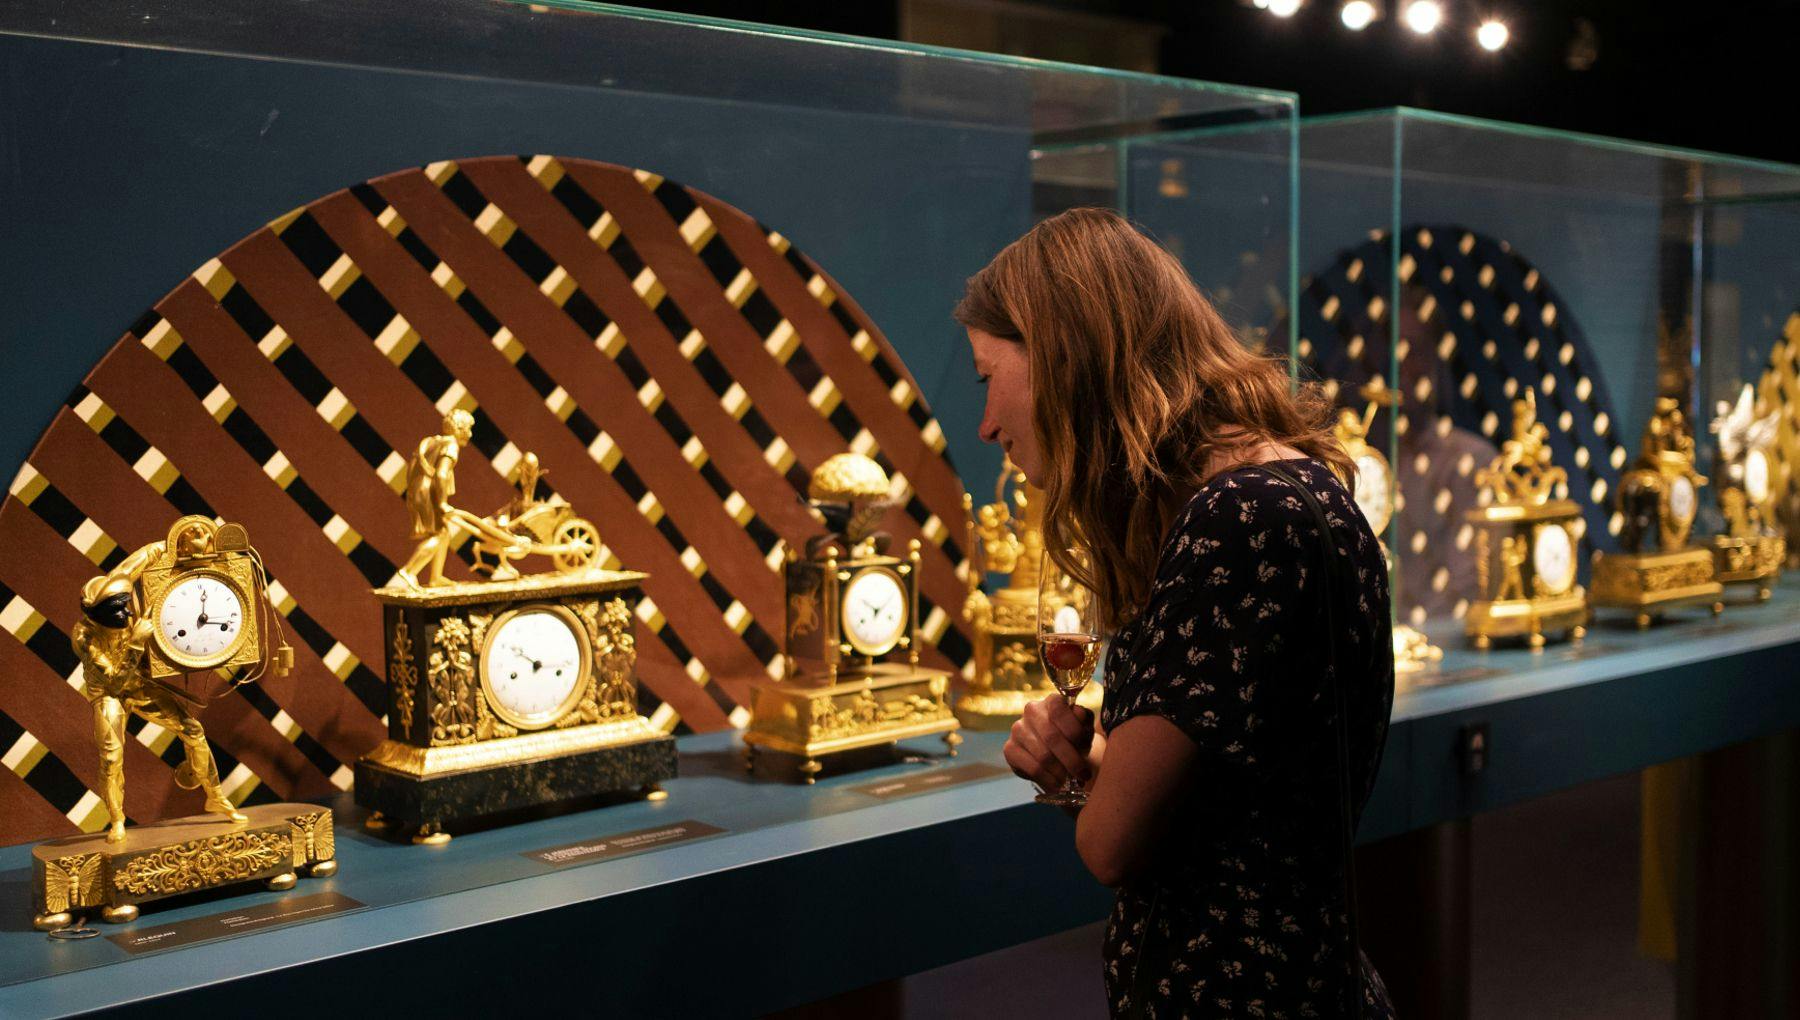 A woman looking at one of the pendulums in the exhibition 'Once Upon A Time' with eighty fire-gilded bronze mantel clocks that can be seen in the new pop-up museum on Museumplein.